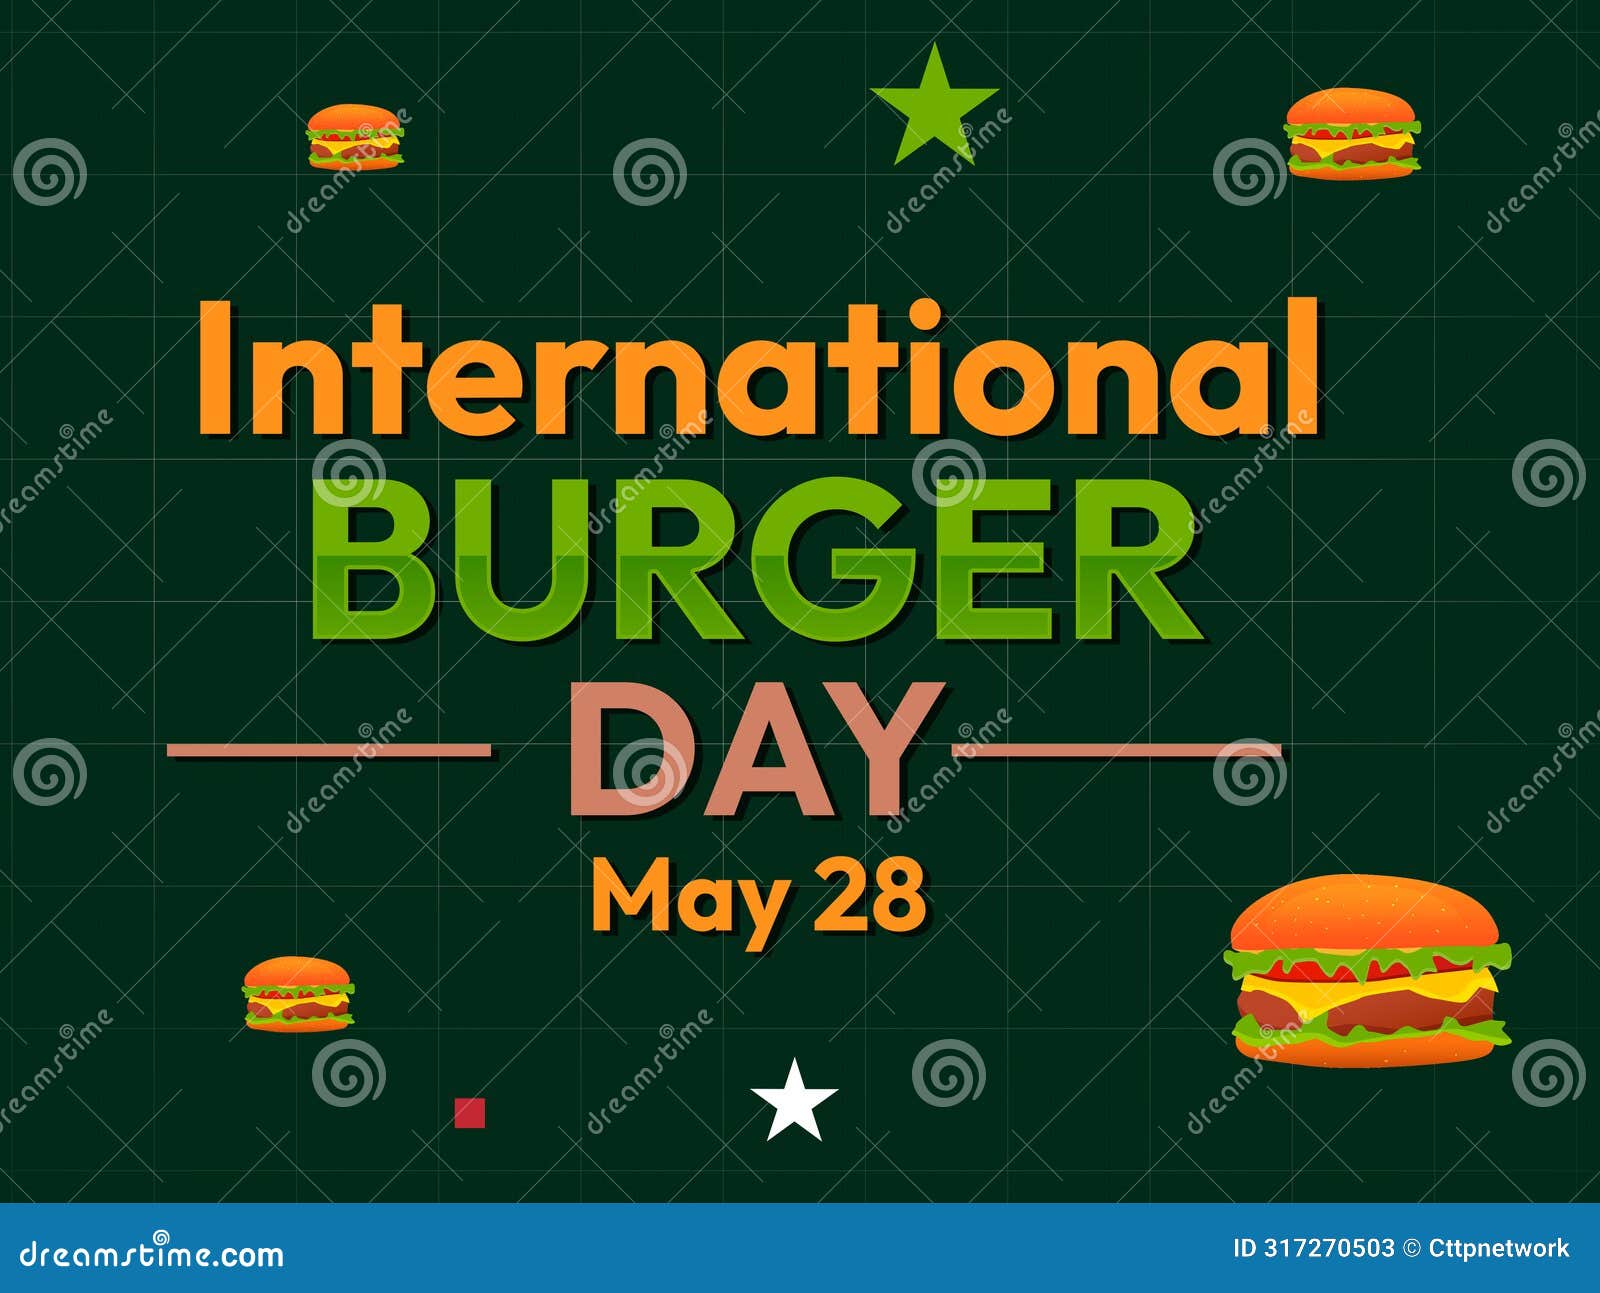 may 28 is celebrated as international burger day, fast food background with typography